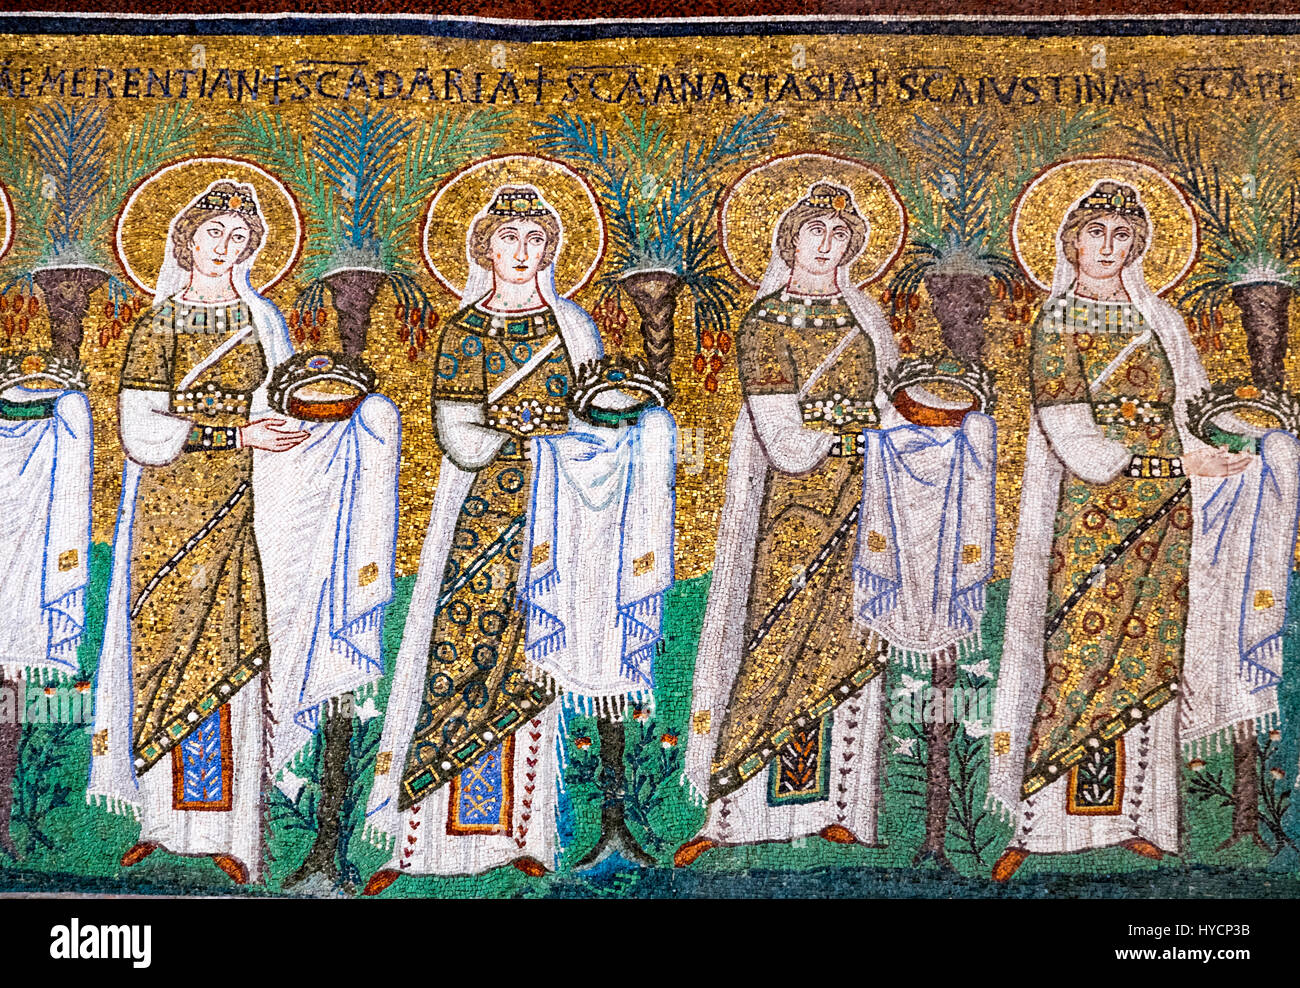 Line of female saints in the church of Sant Apollinare Nuovo in Ravenna, Italy. Stock Photo